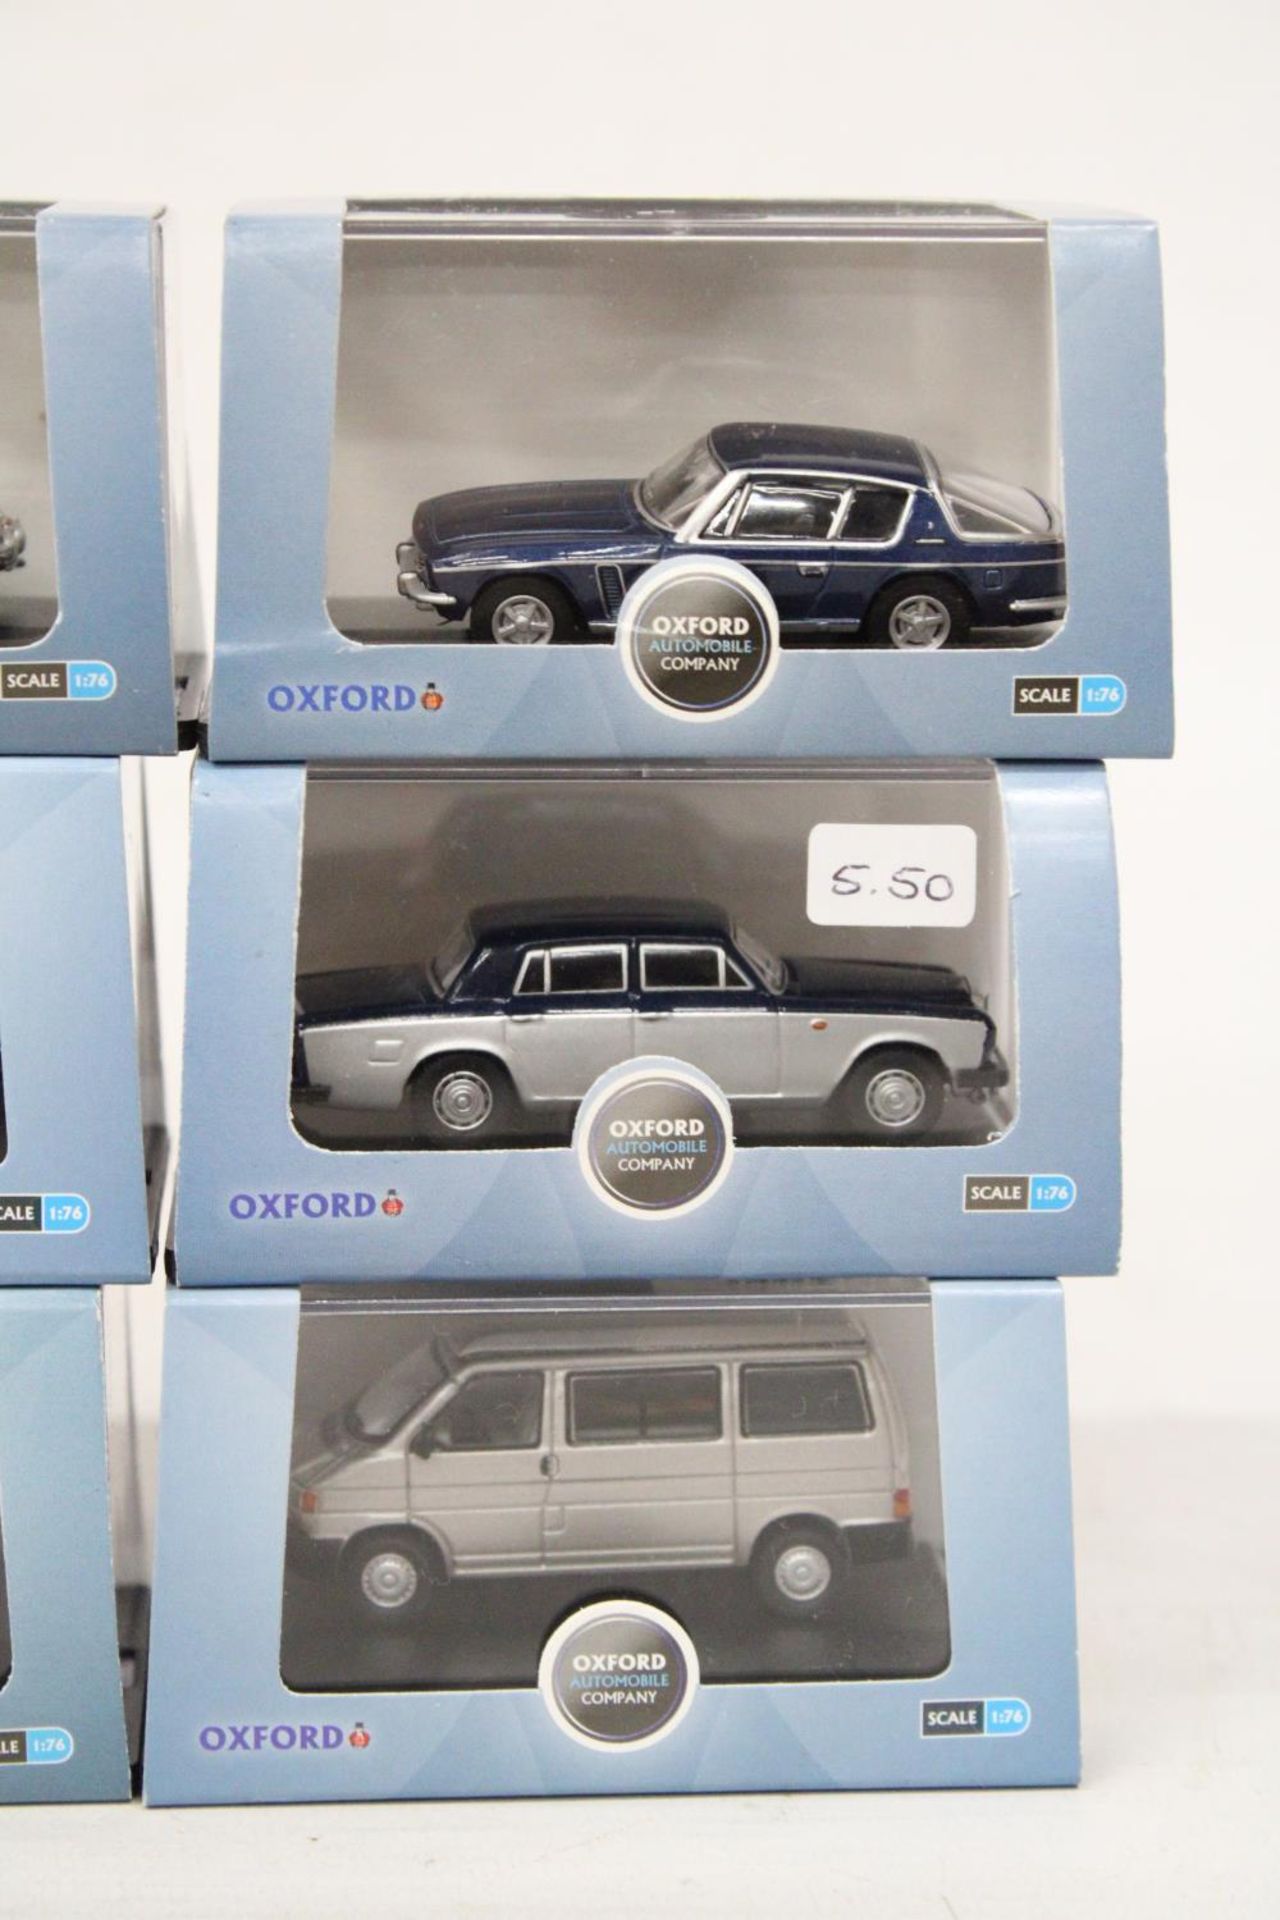 SIX VARIOUS AS NEW AND BOXED OXFORD AUTOMOBILE COMPANY VEHICLES - Image 3 of 7